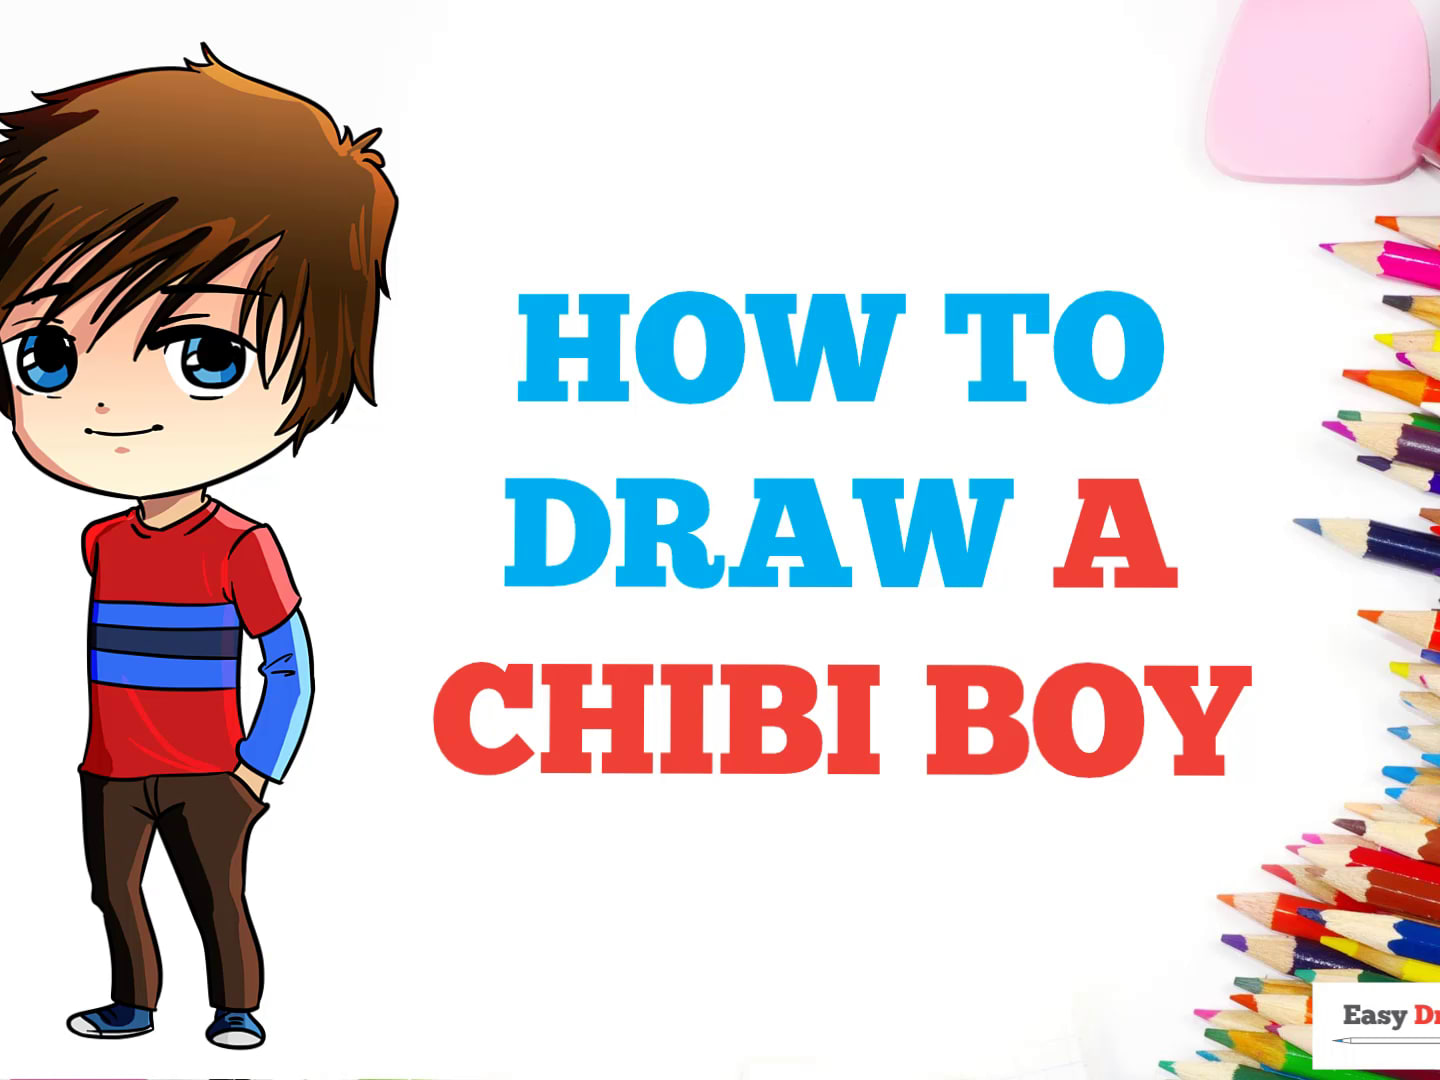 How To Draw A Chibi Boy Step by Step Drawing Guide by GreenKirby   DragoArt